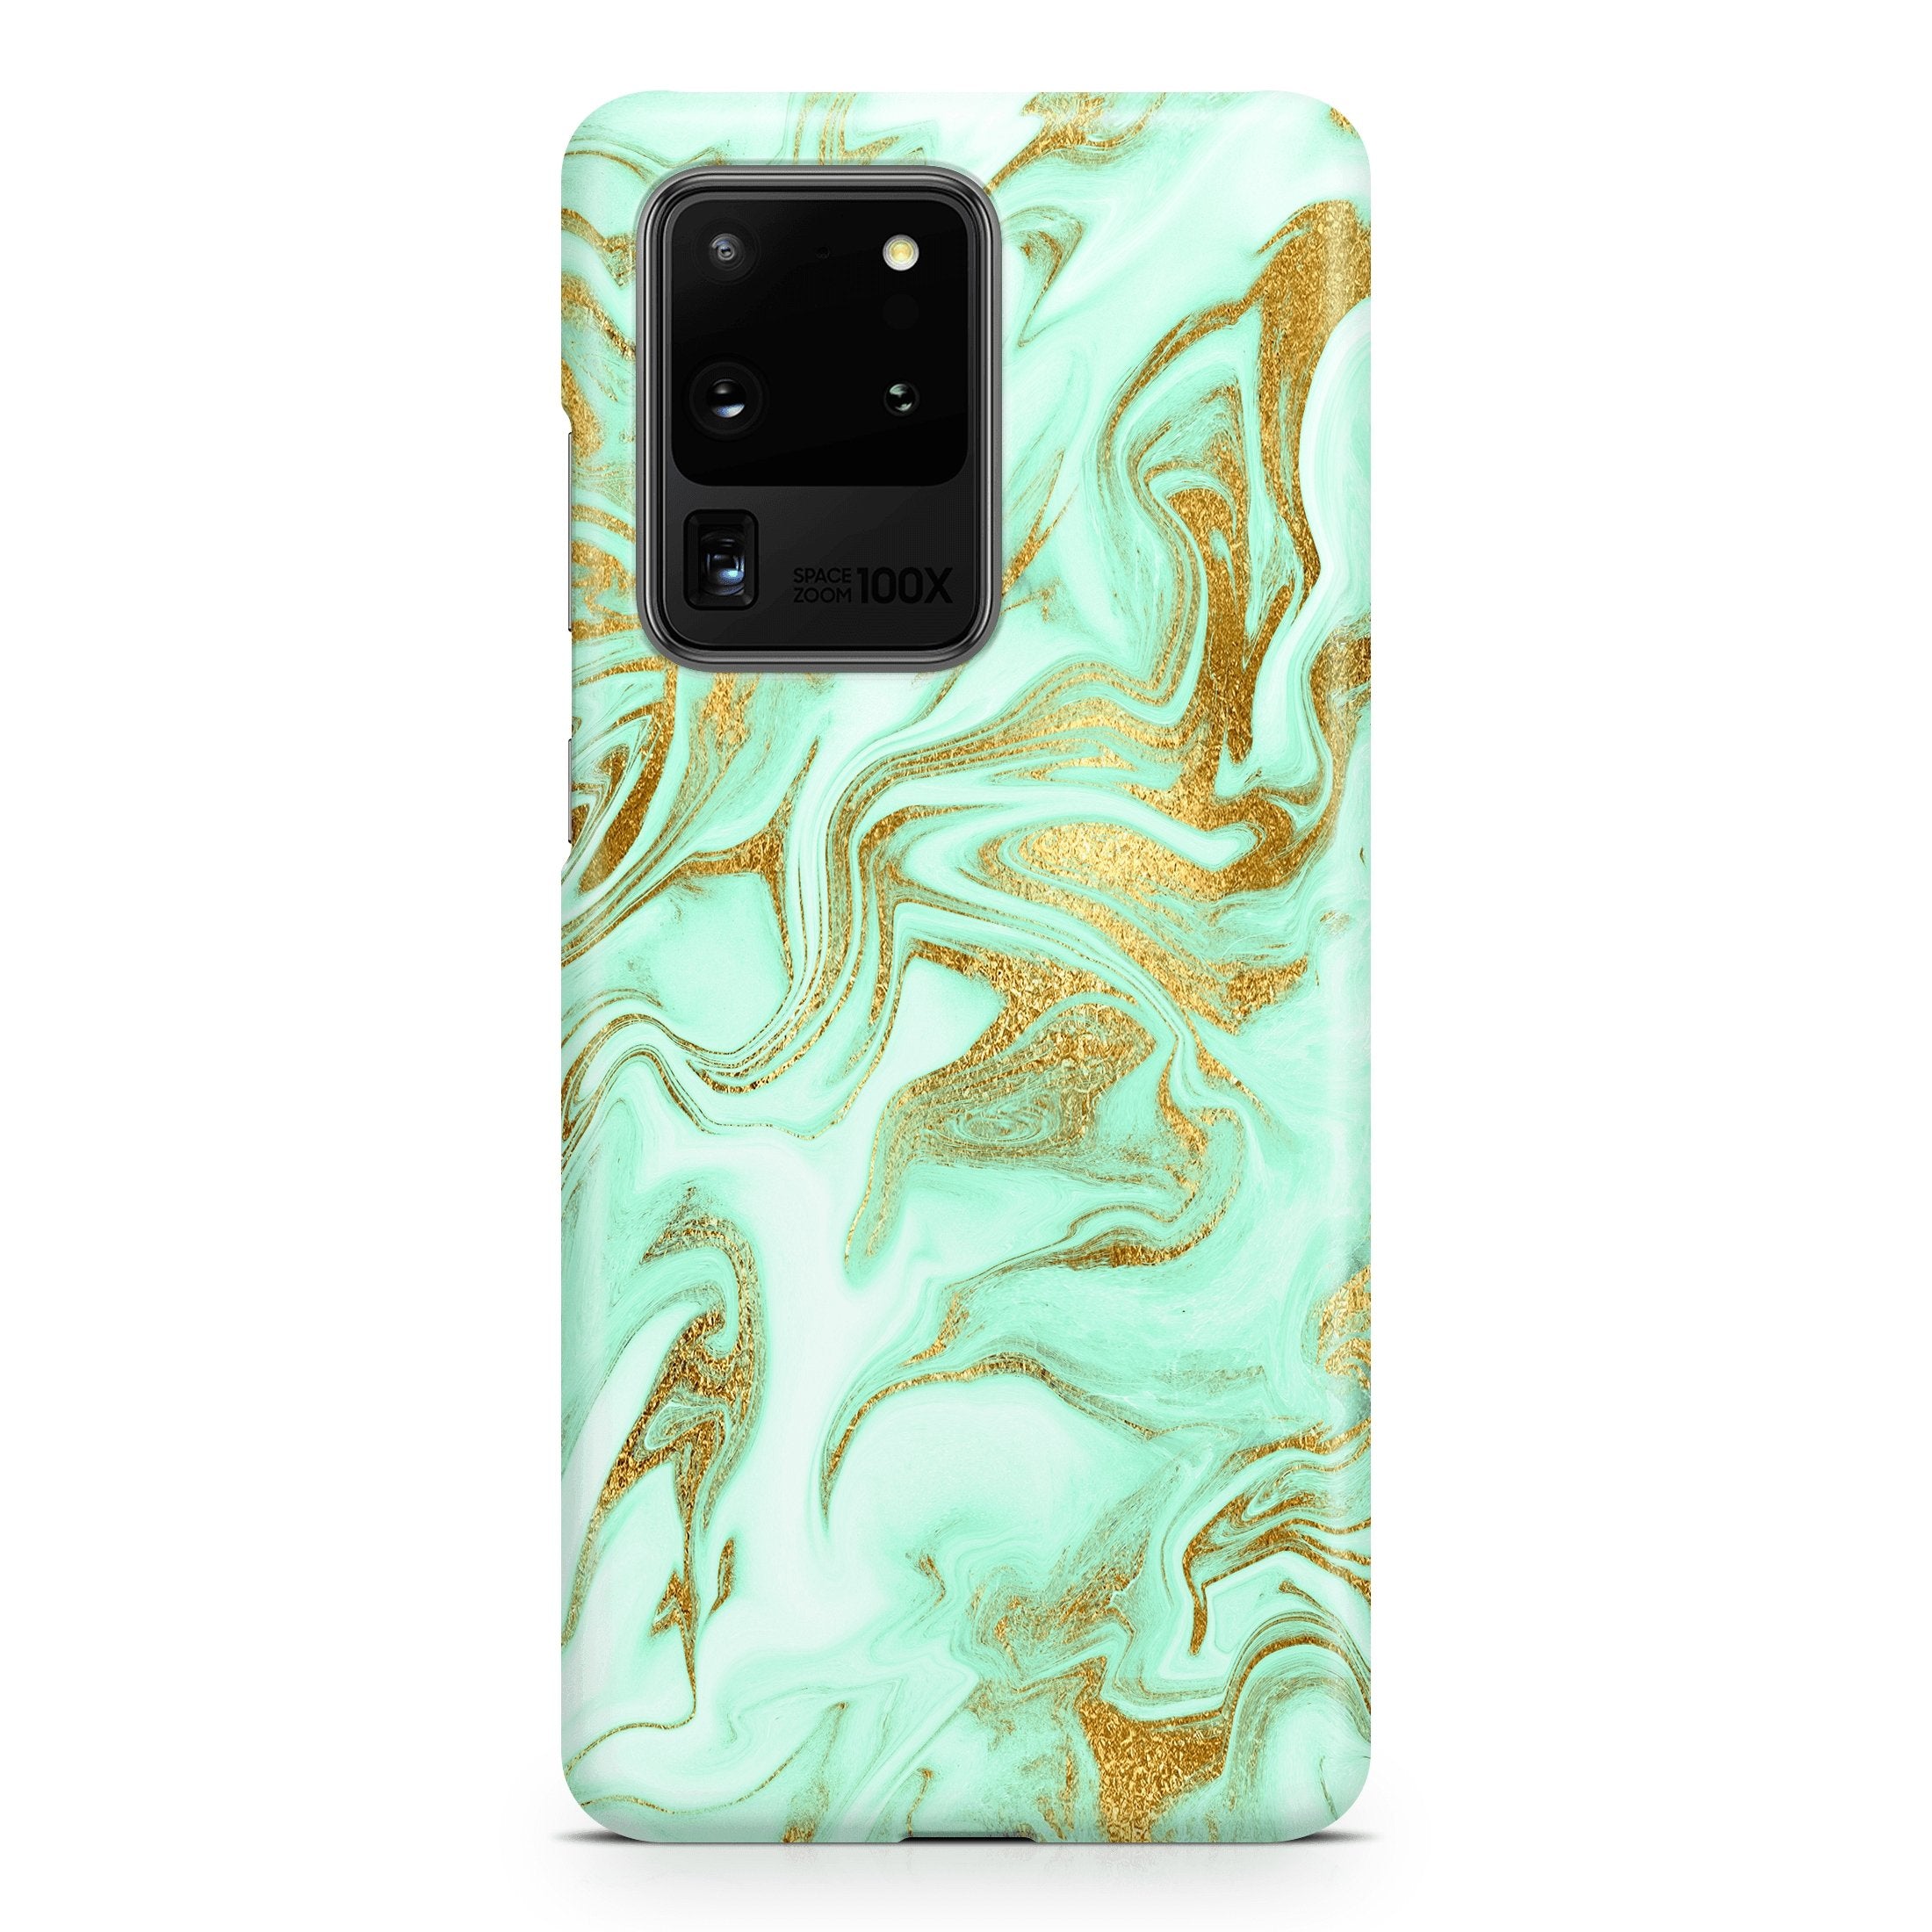 Mint Gold Marble - Samsung phone case designs by CaseSwagger